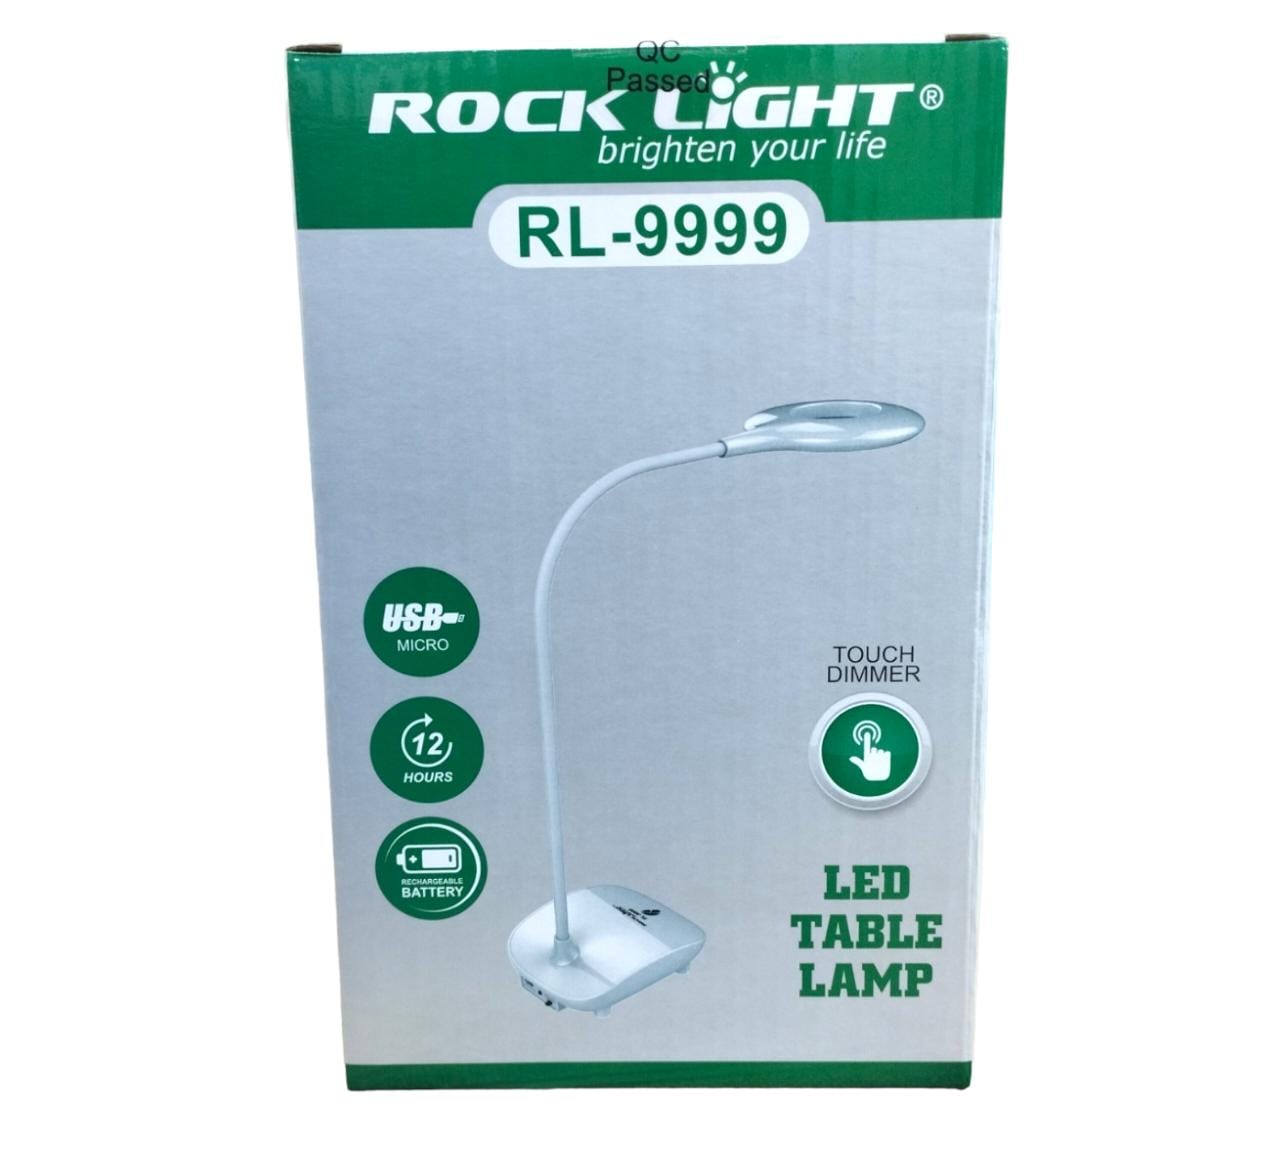 Rock light brighten your life led table lamp 